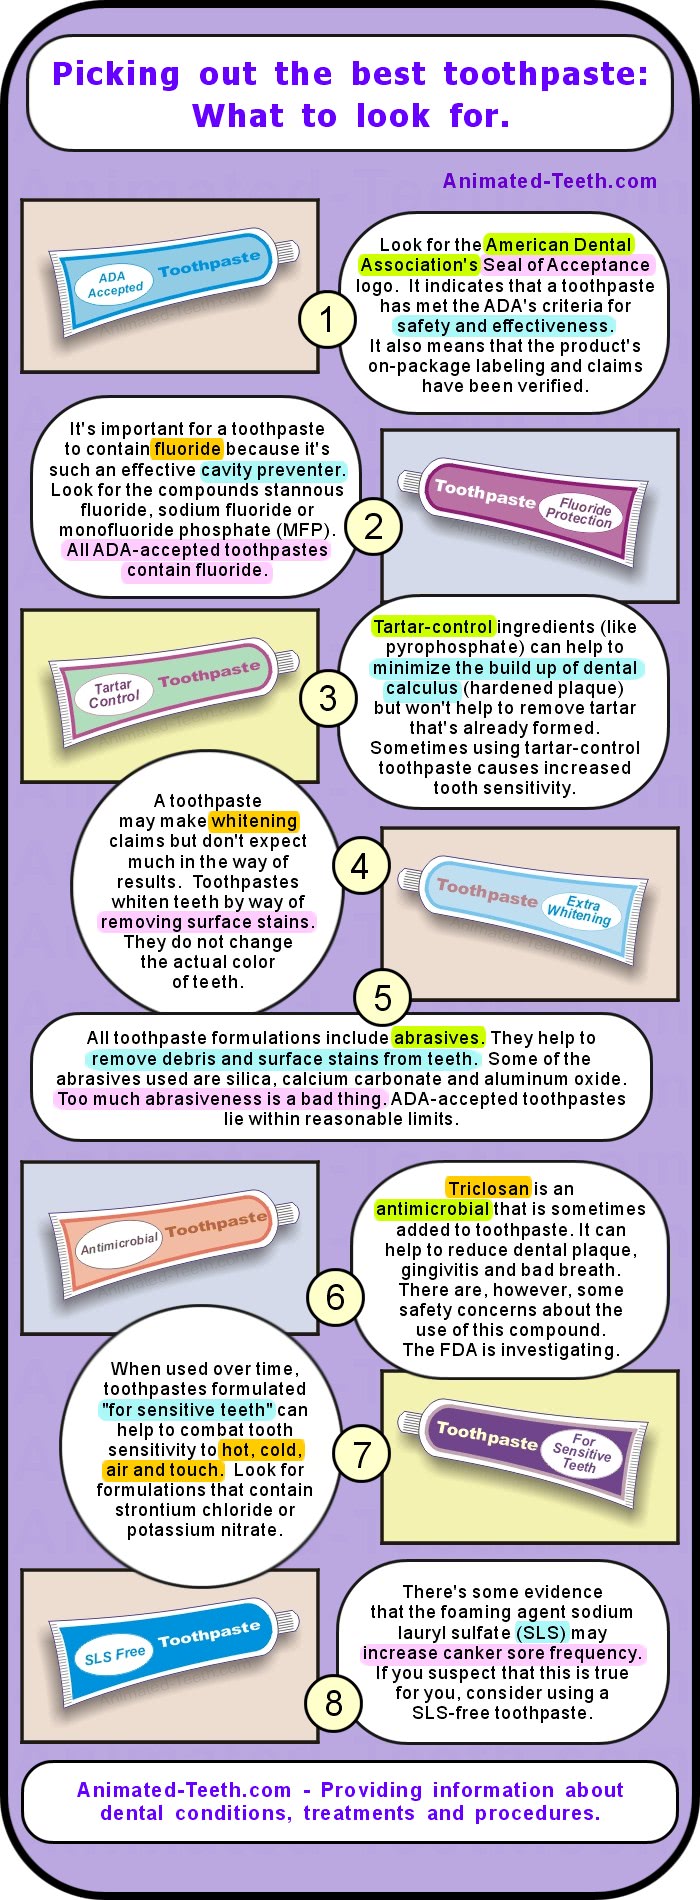 How to pick out the best toothpaste.